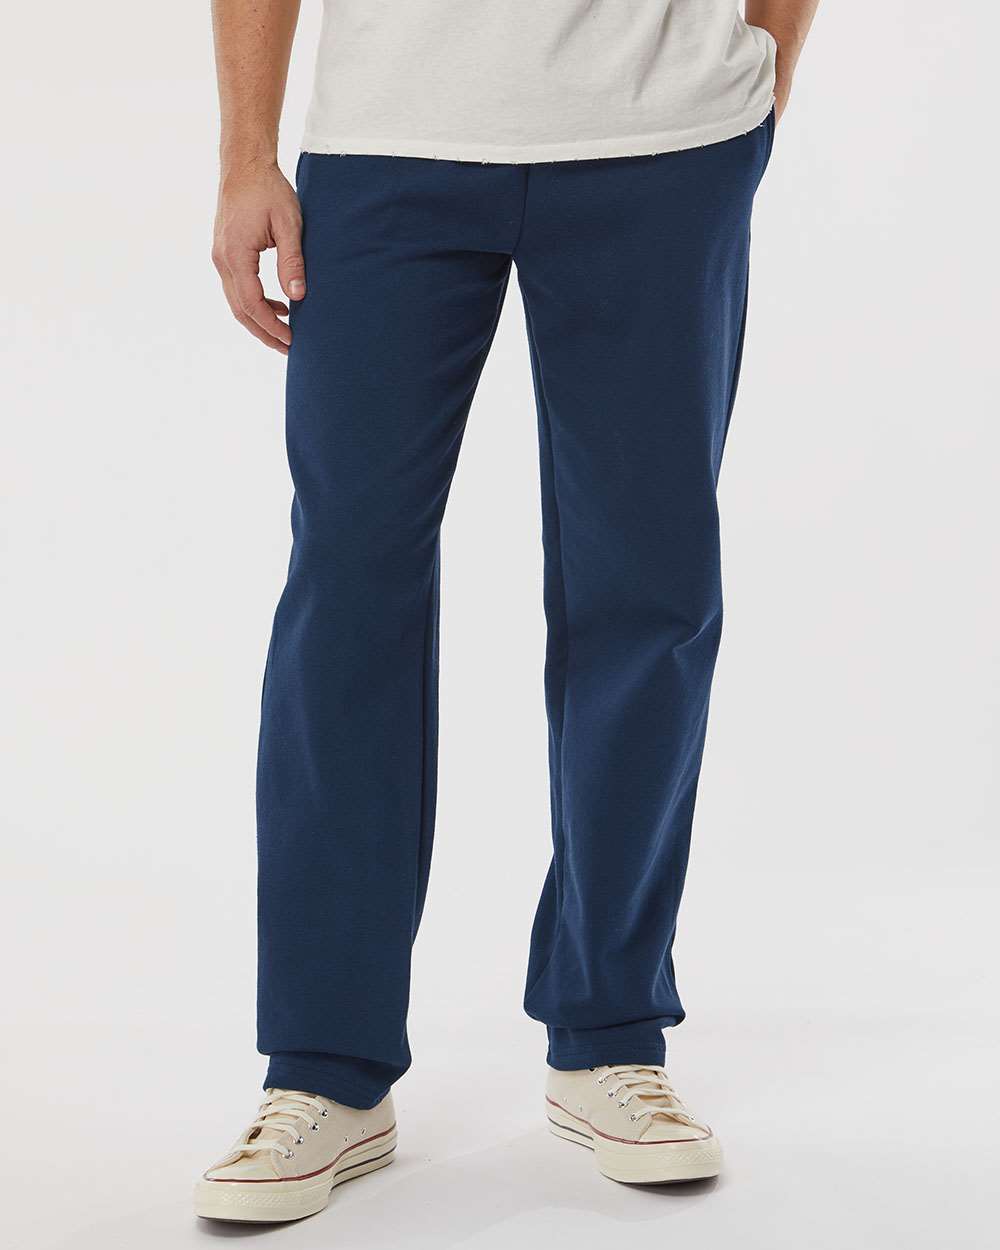 King Fashion Pocketed Open Bottom Sweatpants KF9022 #colormdl_Navy